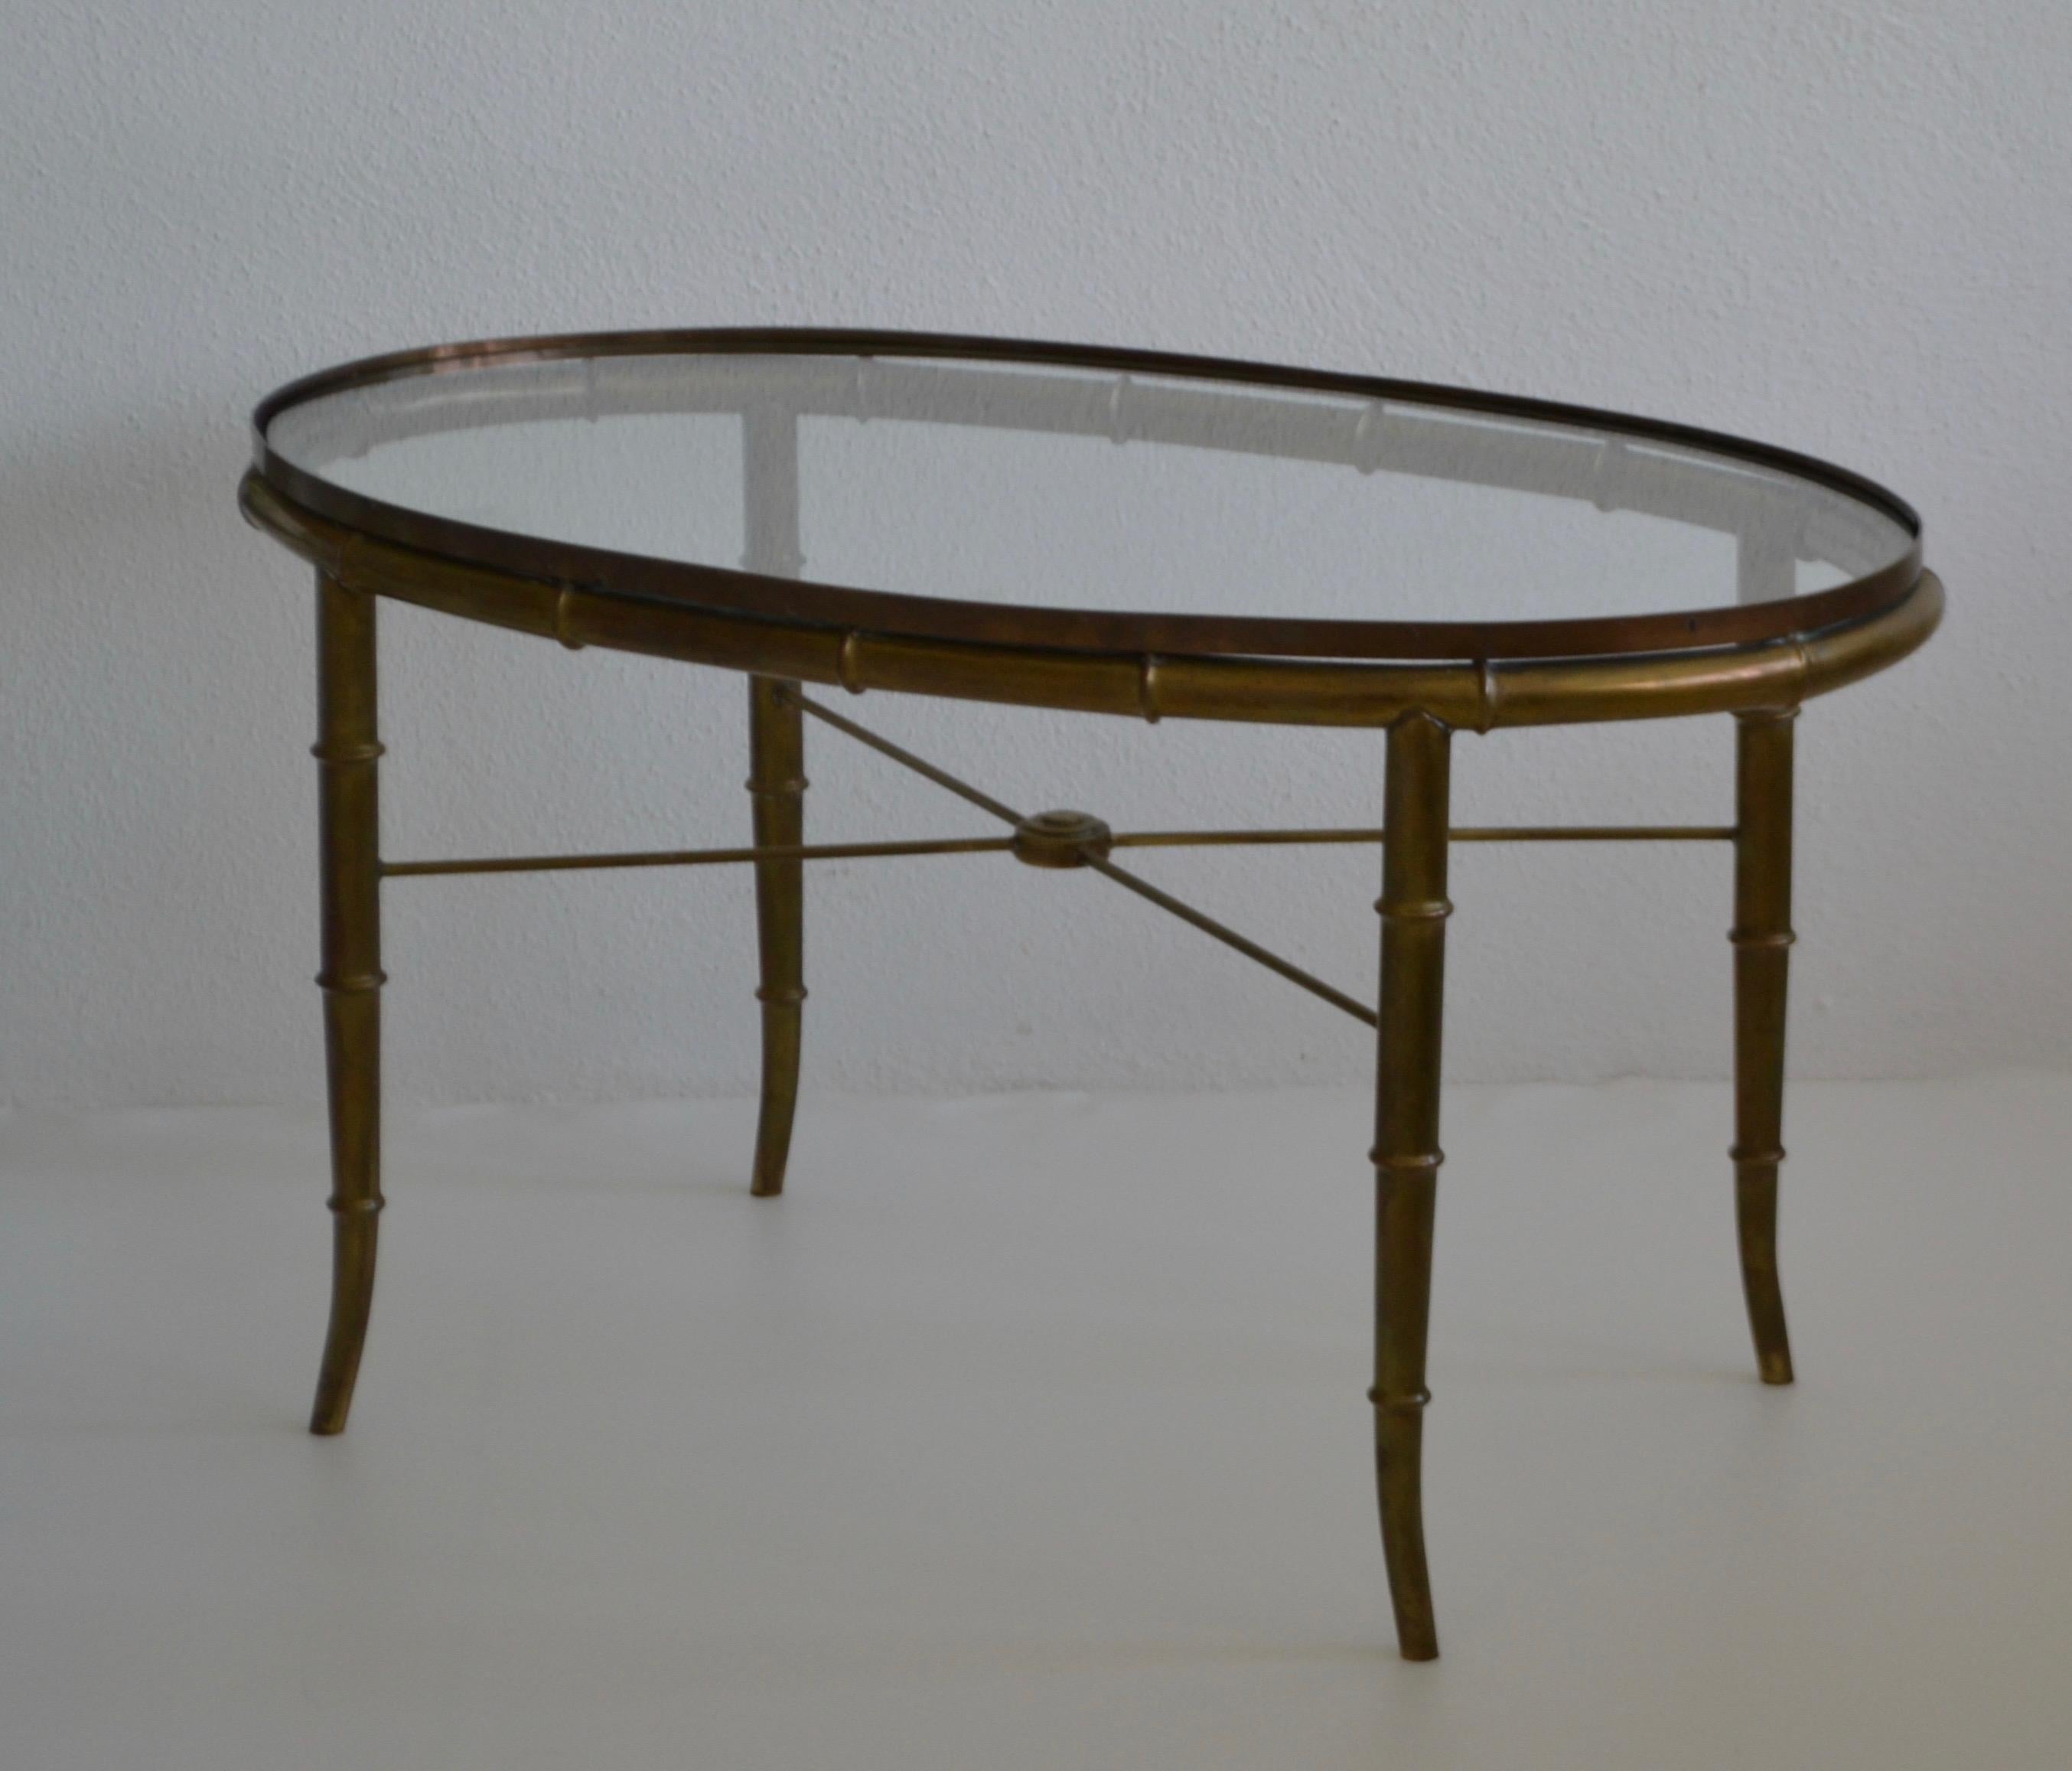 Mid-20th Century Hollywood Regency Italian Brass Faux Bamboo Table For Sale